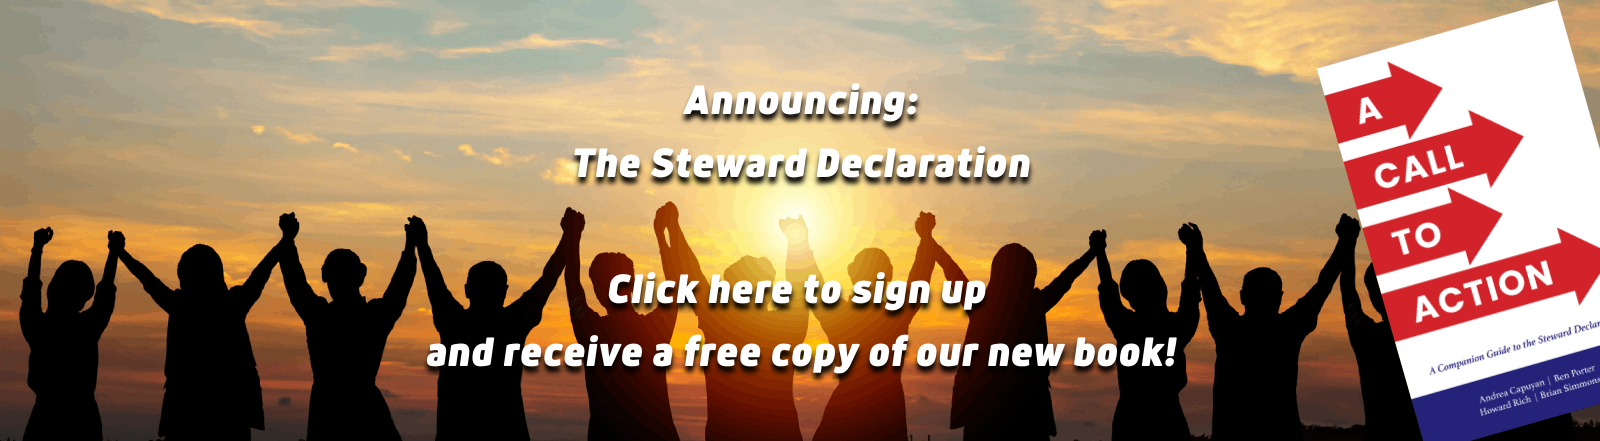 Announcing The Steward Declaration Click here to sign up and receive a free copy of our new book!